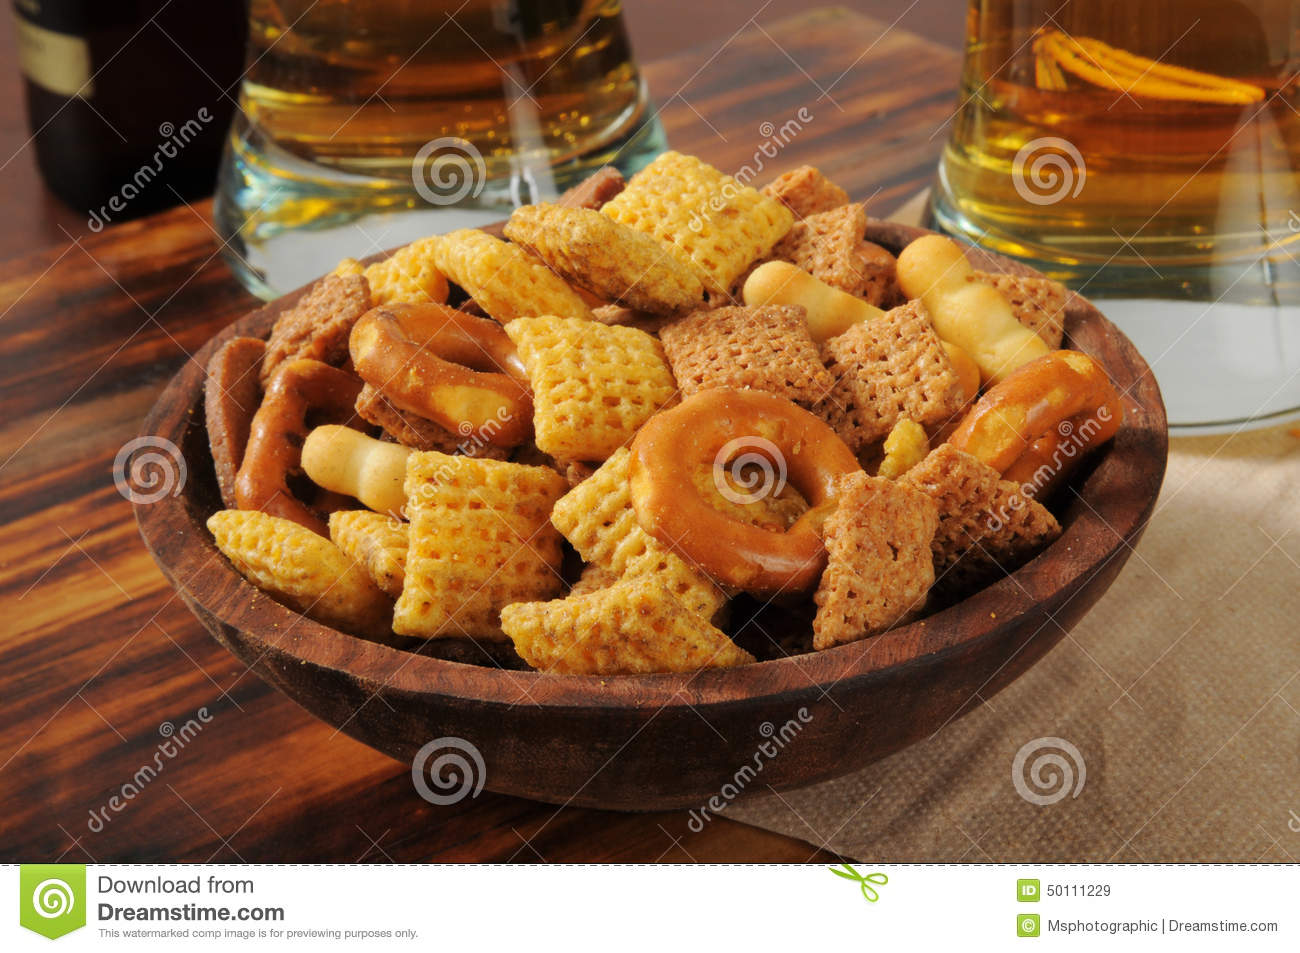 Snack Mix Of Pretzels Rice And Wheat Cereal And Crackers On A Bar